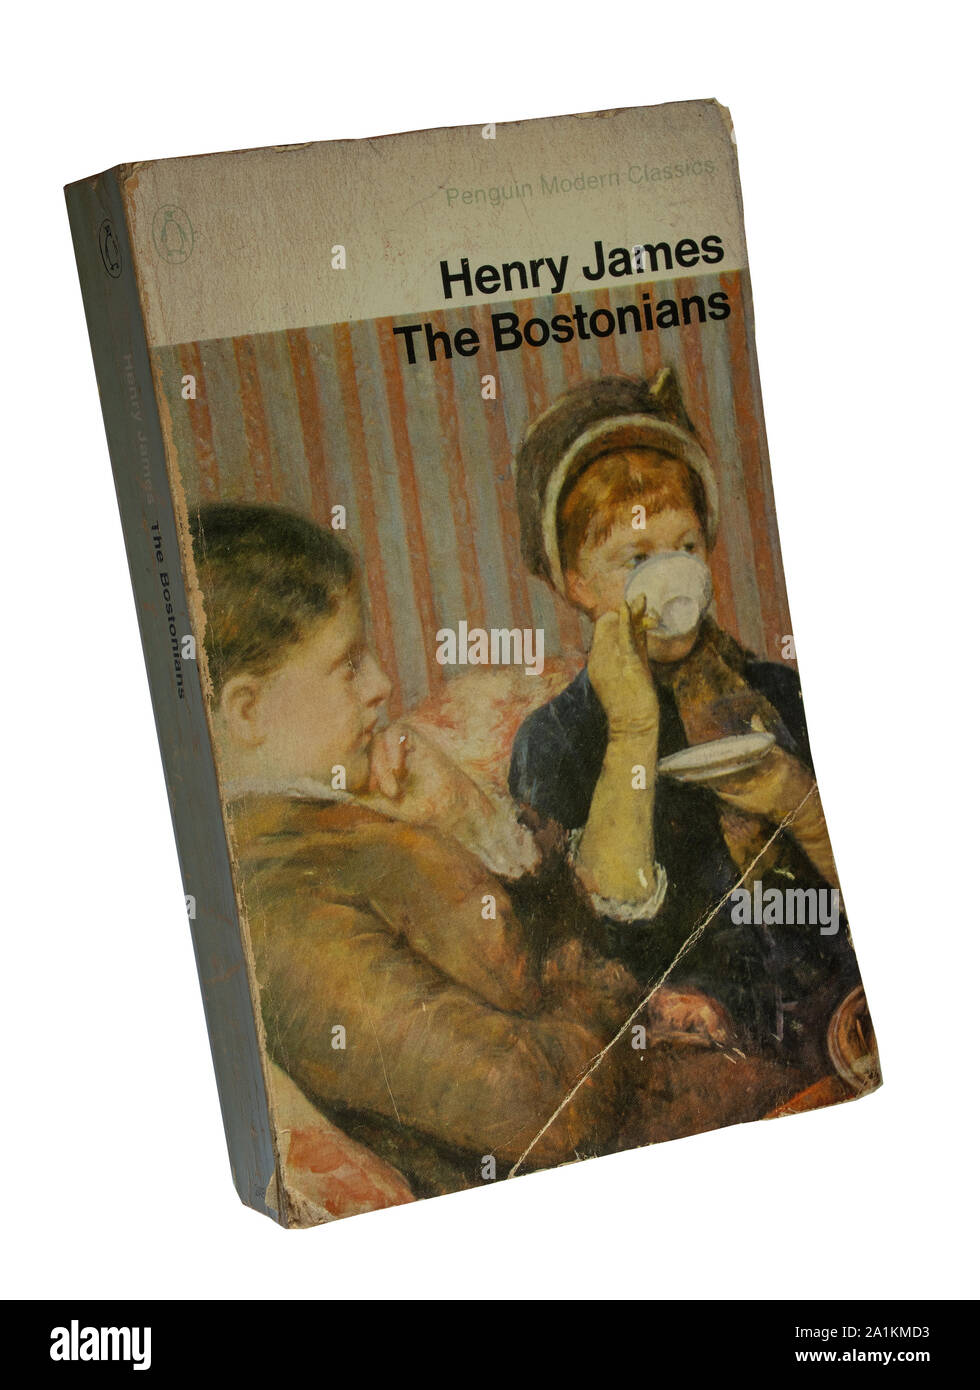 The Bostonians, paperback book or novel by Henry James Stock Photo